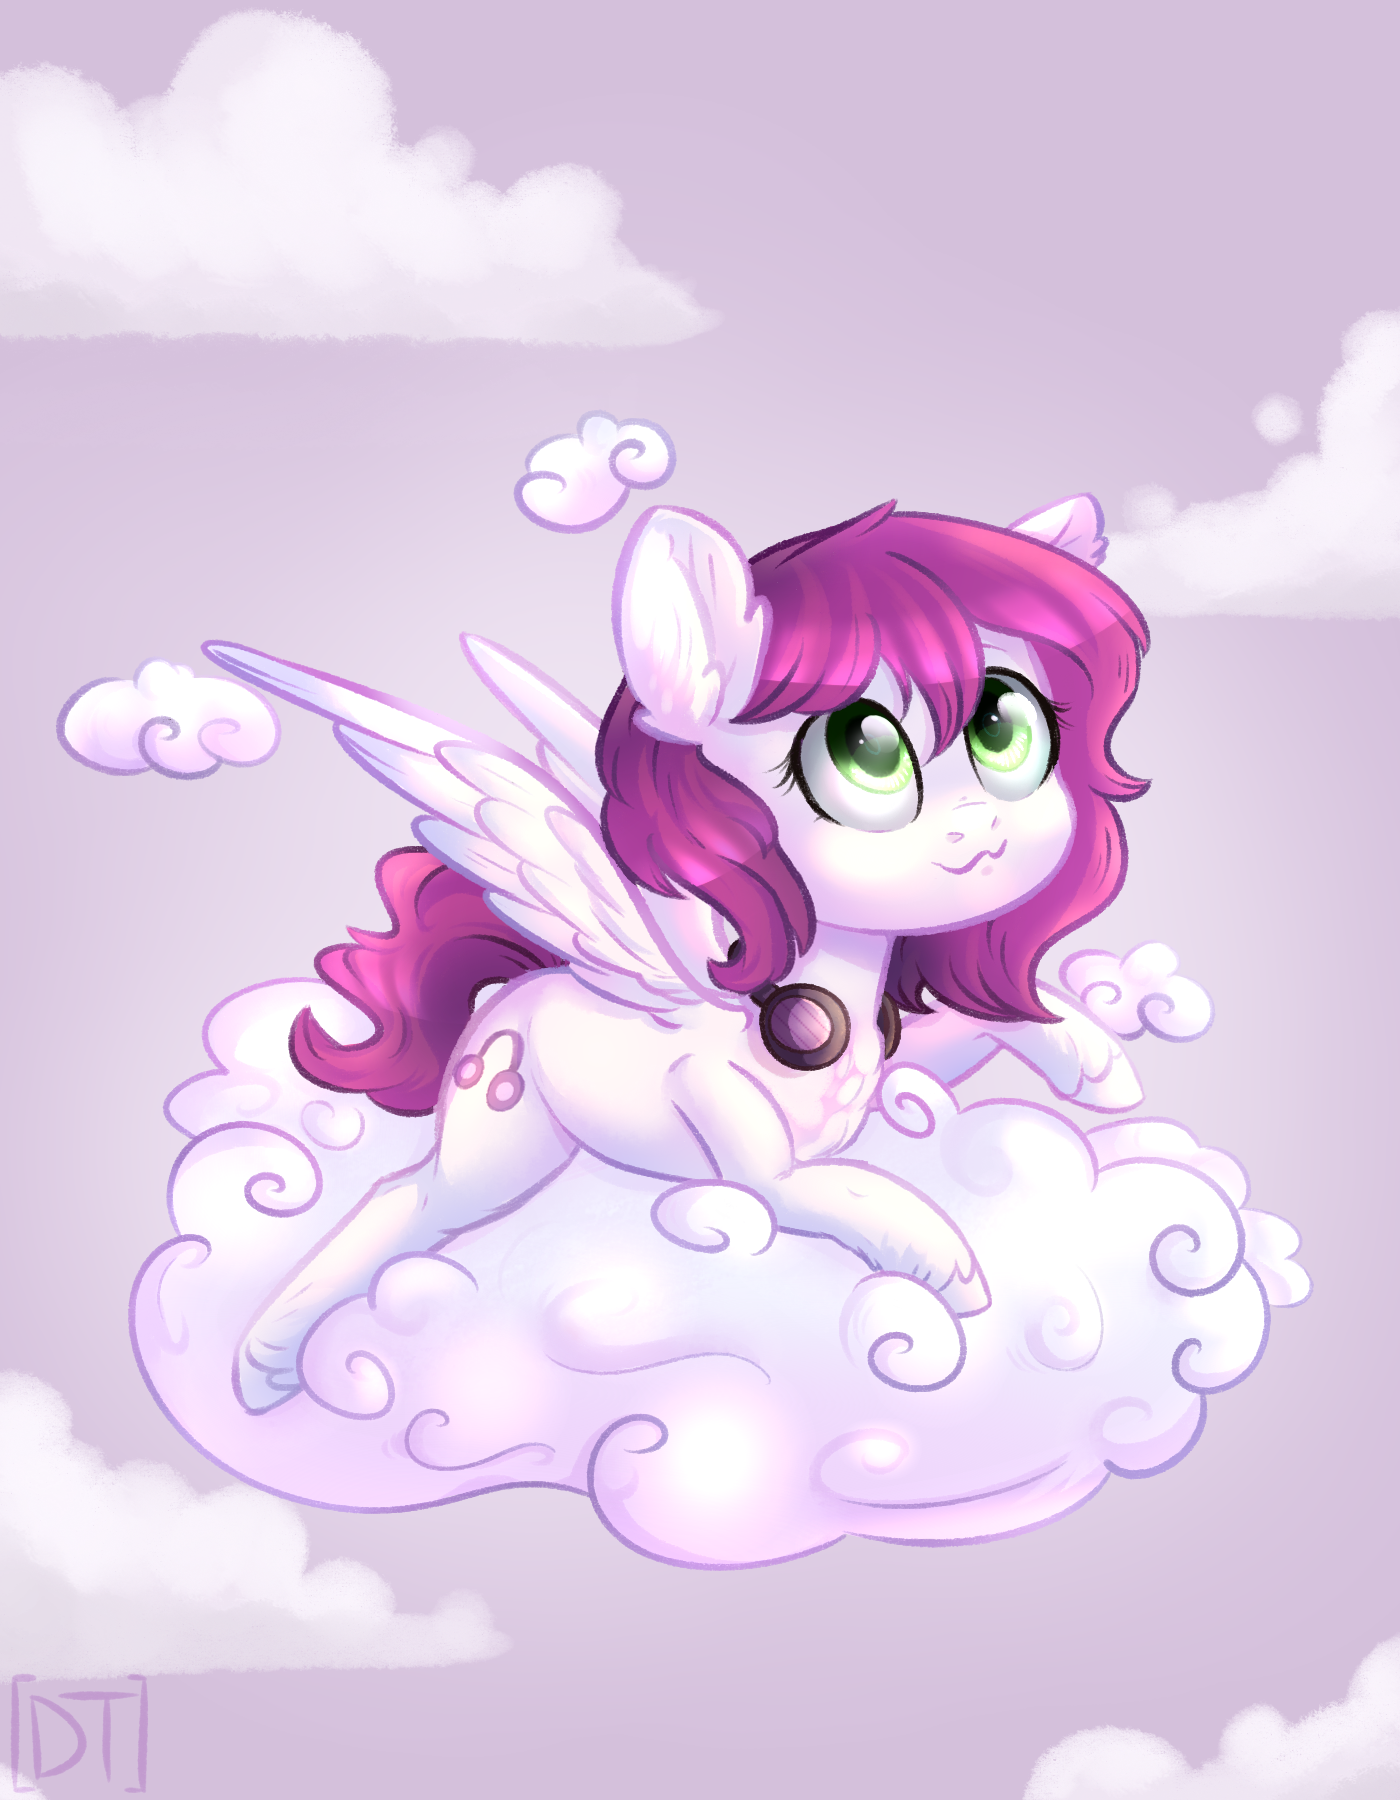 Donut on a cloud - My, My little pony, Pony, Drawing, Digital, My, Original character